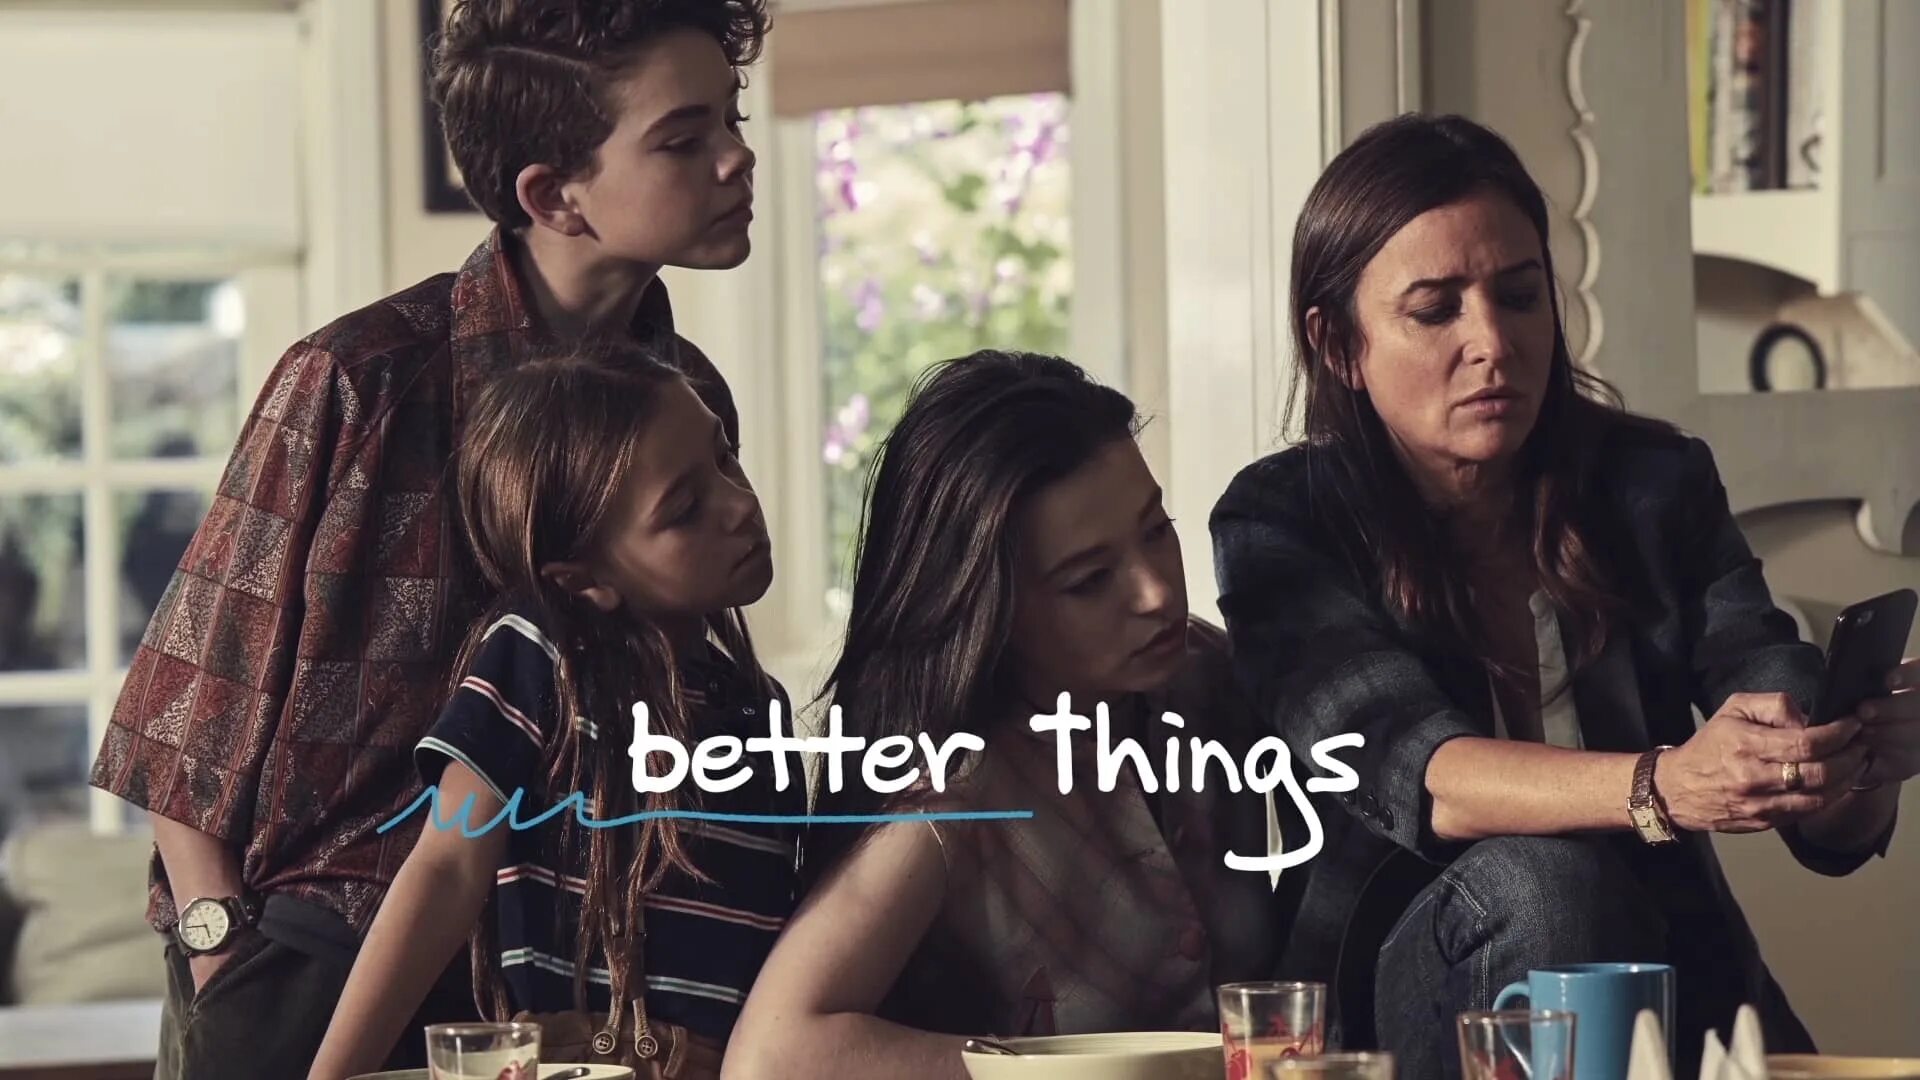 Better things TV posters.